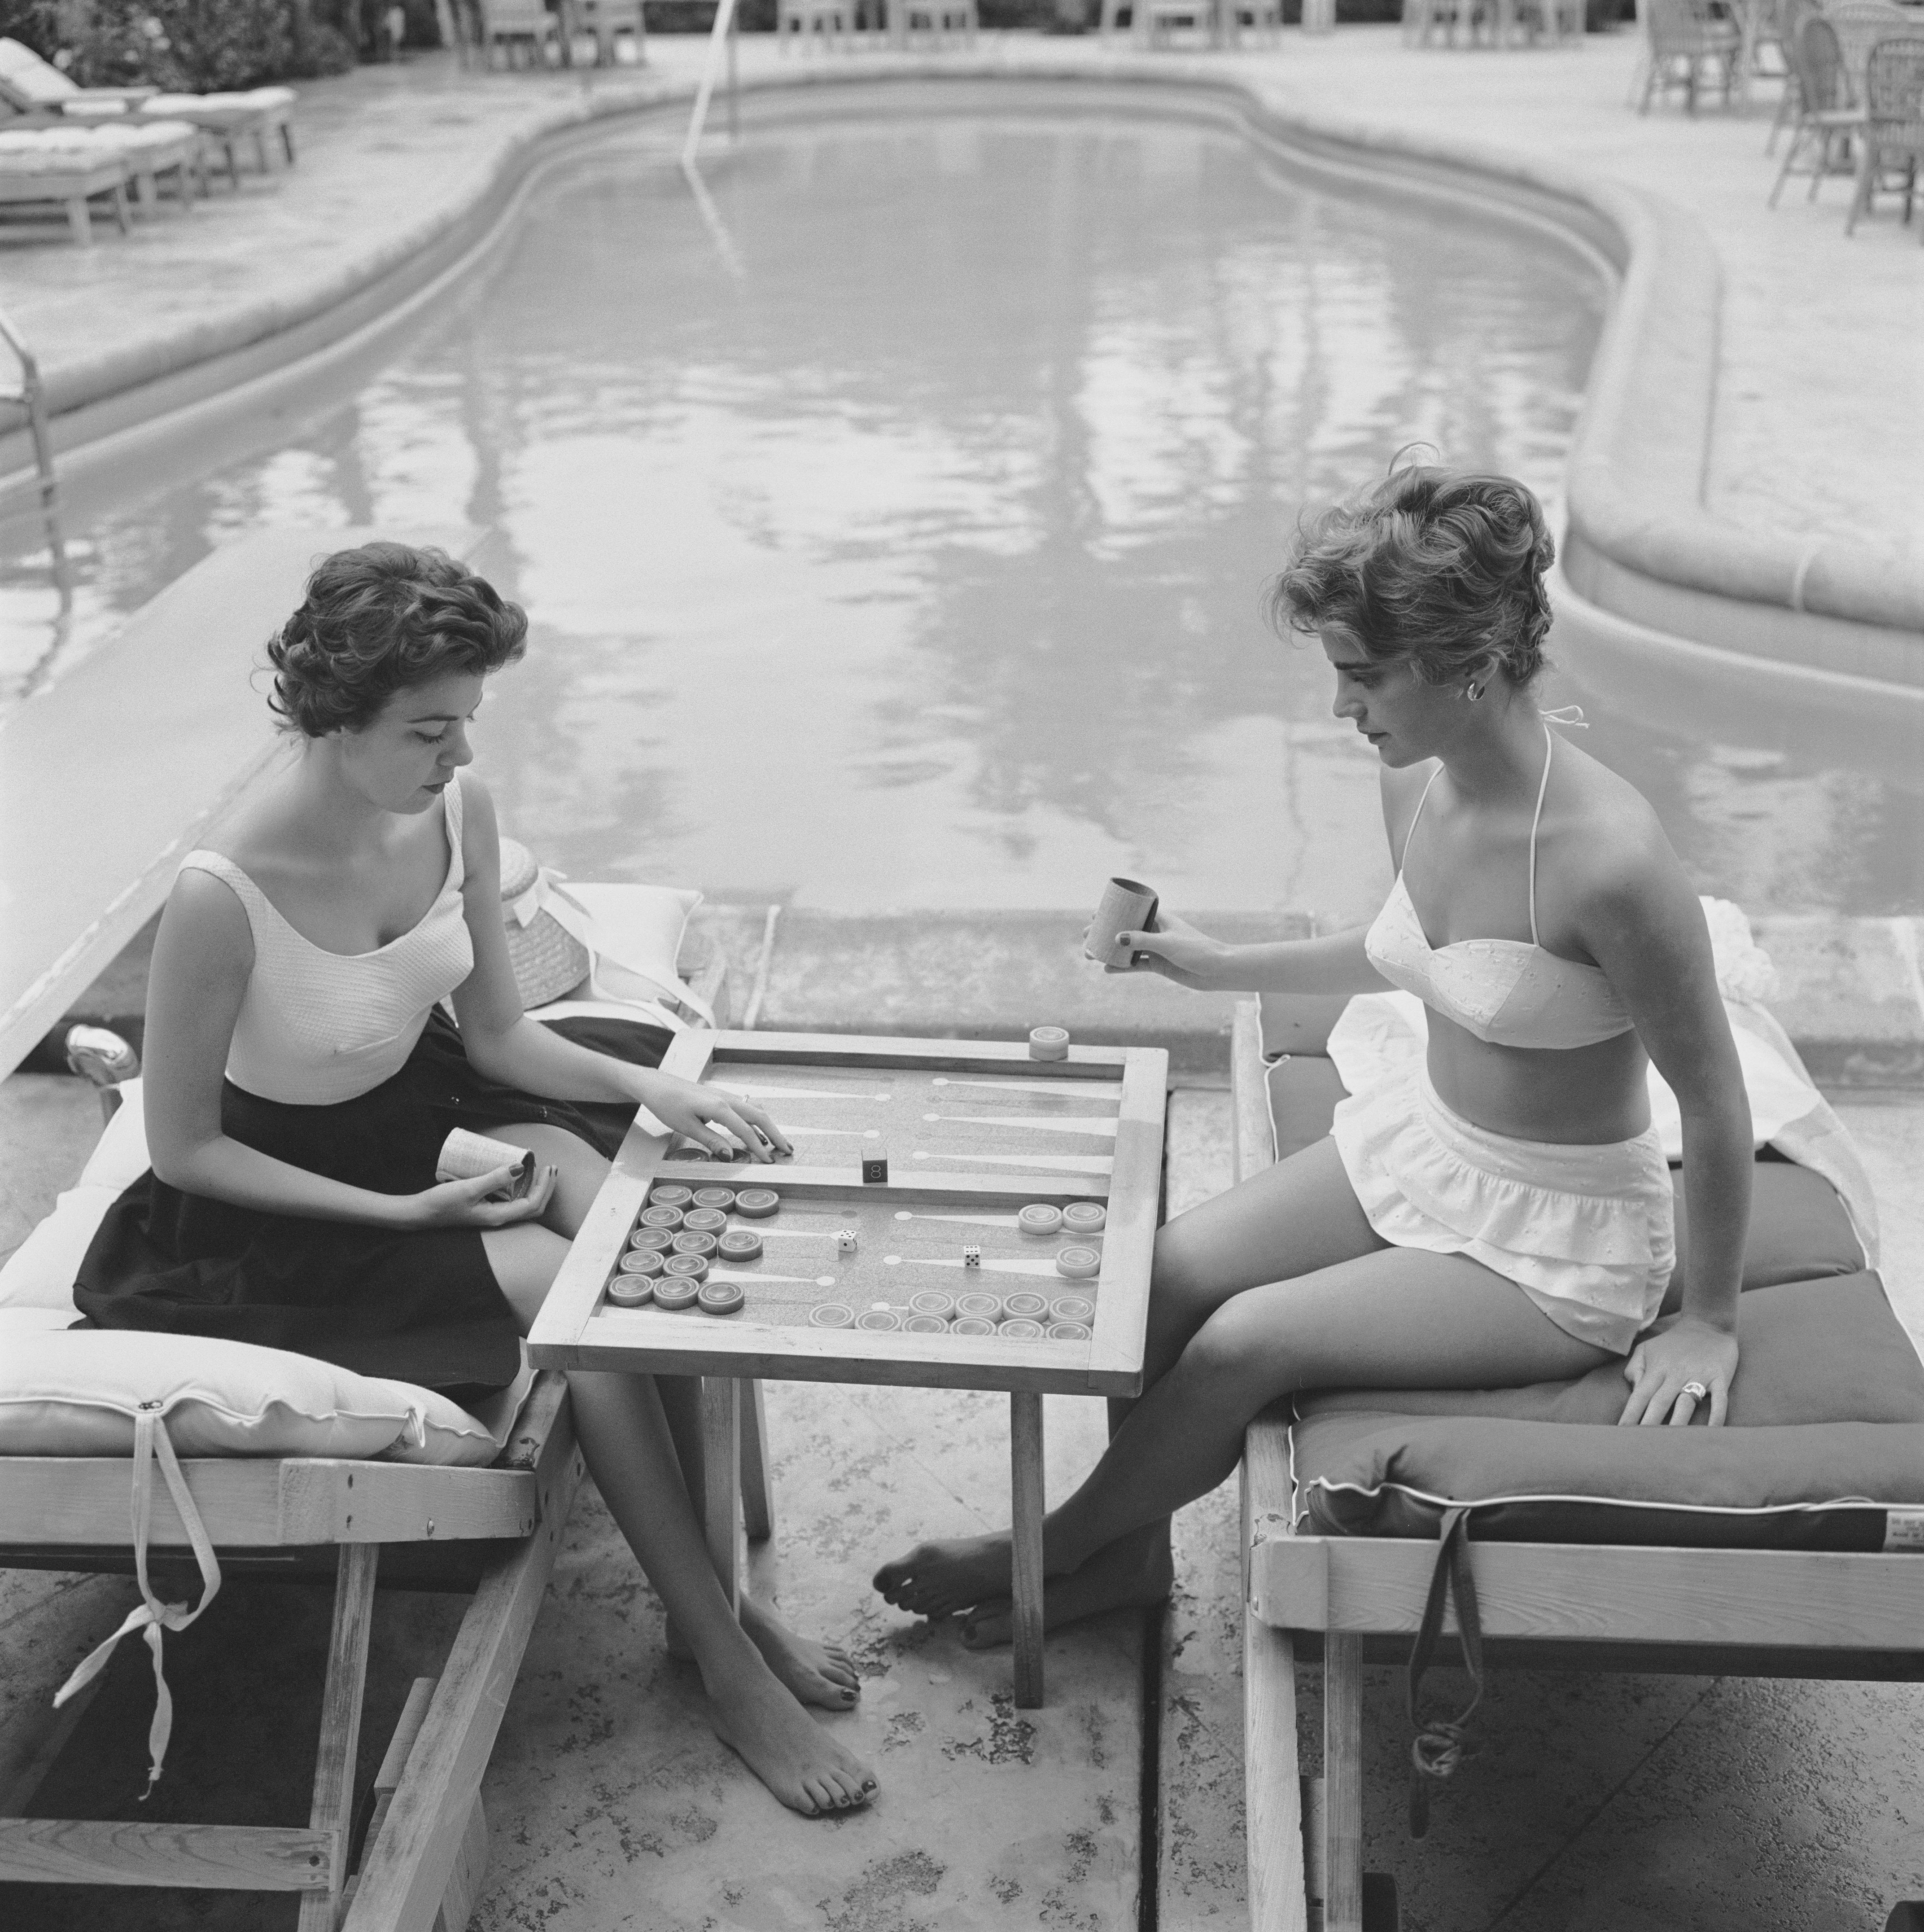 Countess Peter Jean-Baptiste de Manio (left) and Mary-Beth Turner playing backgammon by a swimming pool in Palm Beach, Florida, 1959.

Once a year, we uncover never-before-seen Slim Aarons images! This is one of fifteen from our new collection. A